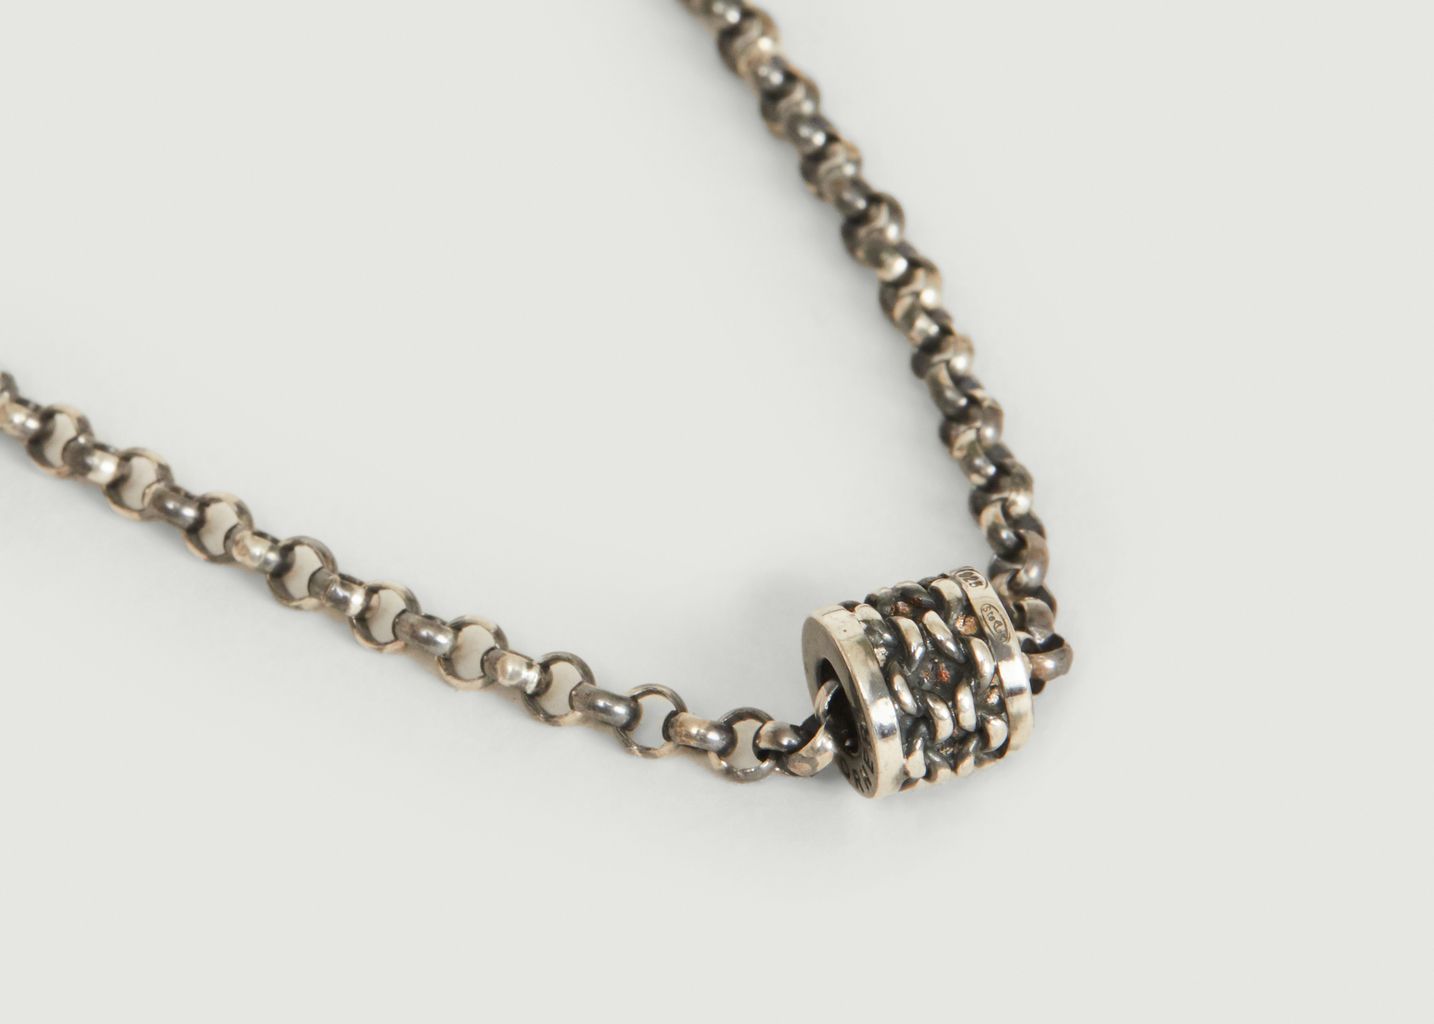 Necklace Ring Chain - Orner